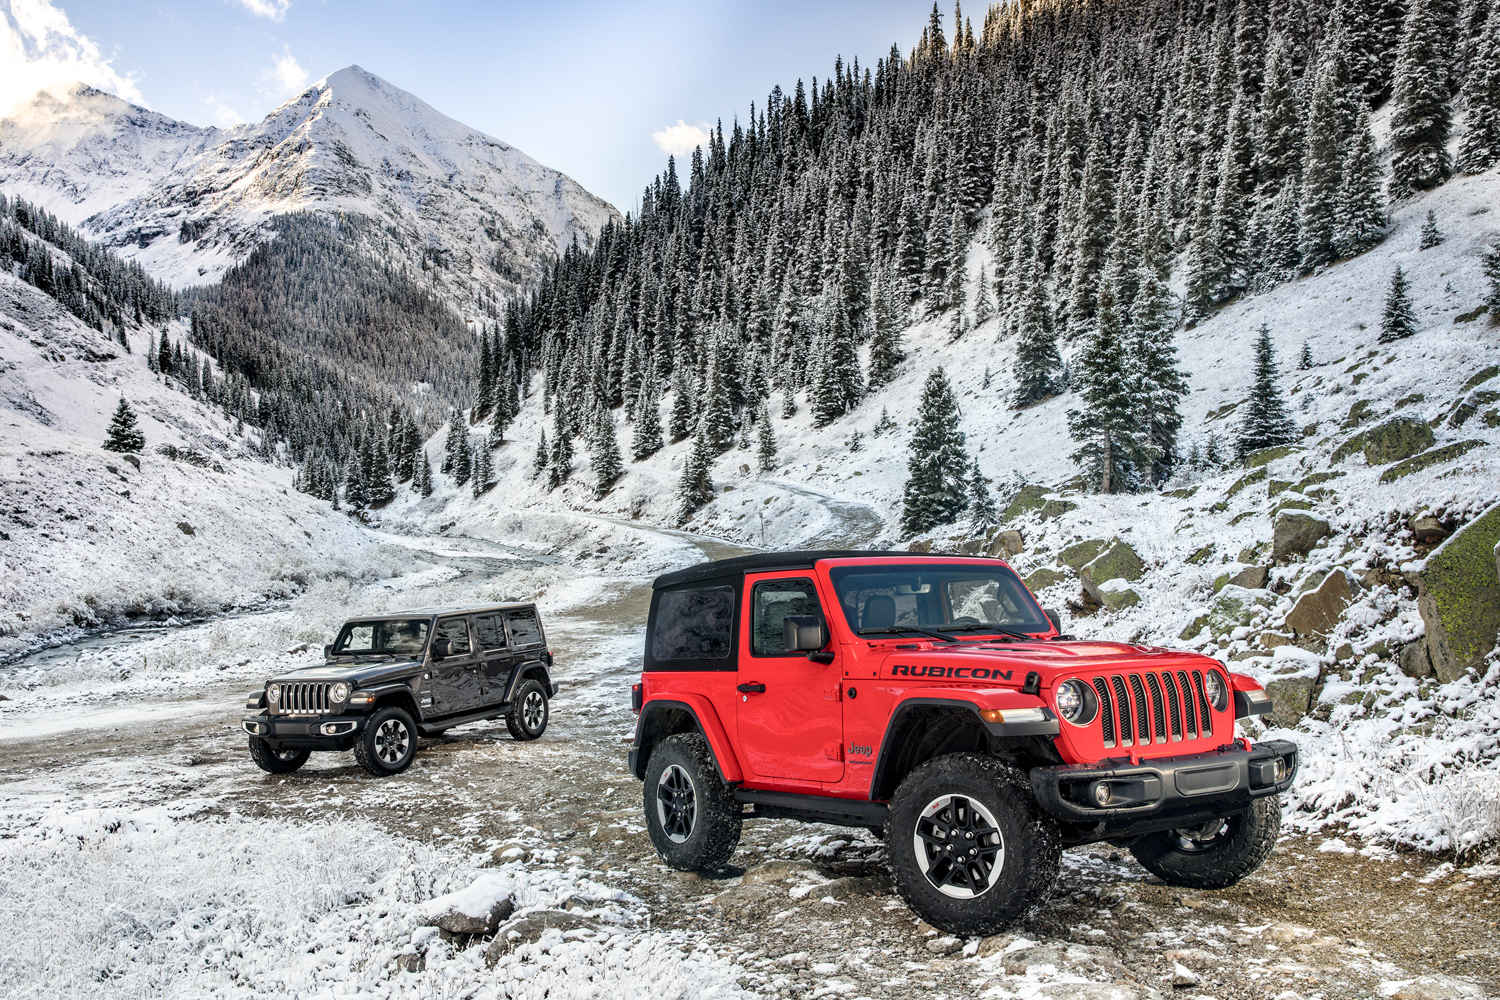 2018 Jeep Wrangler First Drive Review | Pictures, Specs | Digital Trends